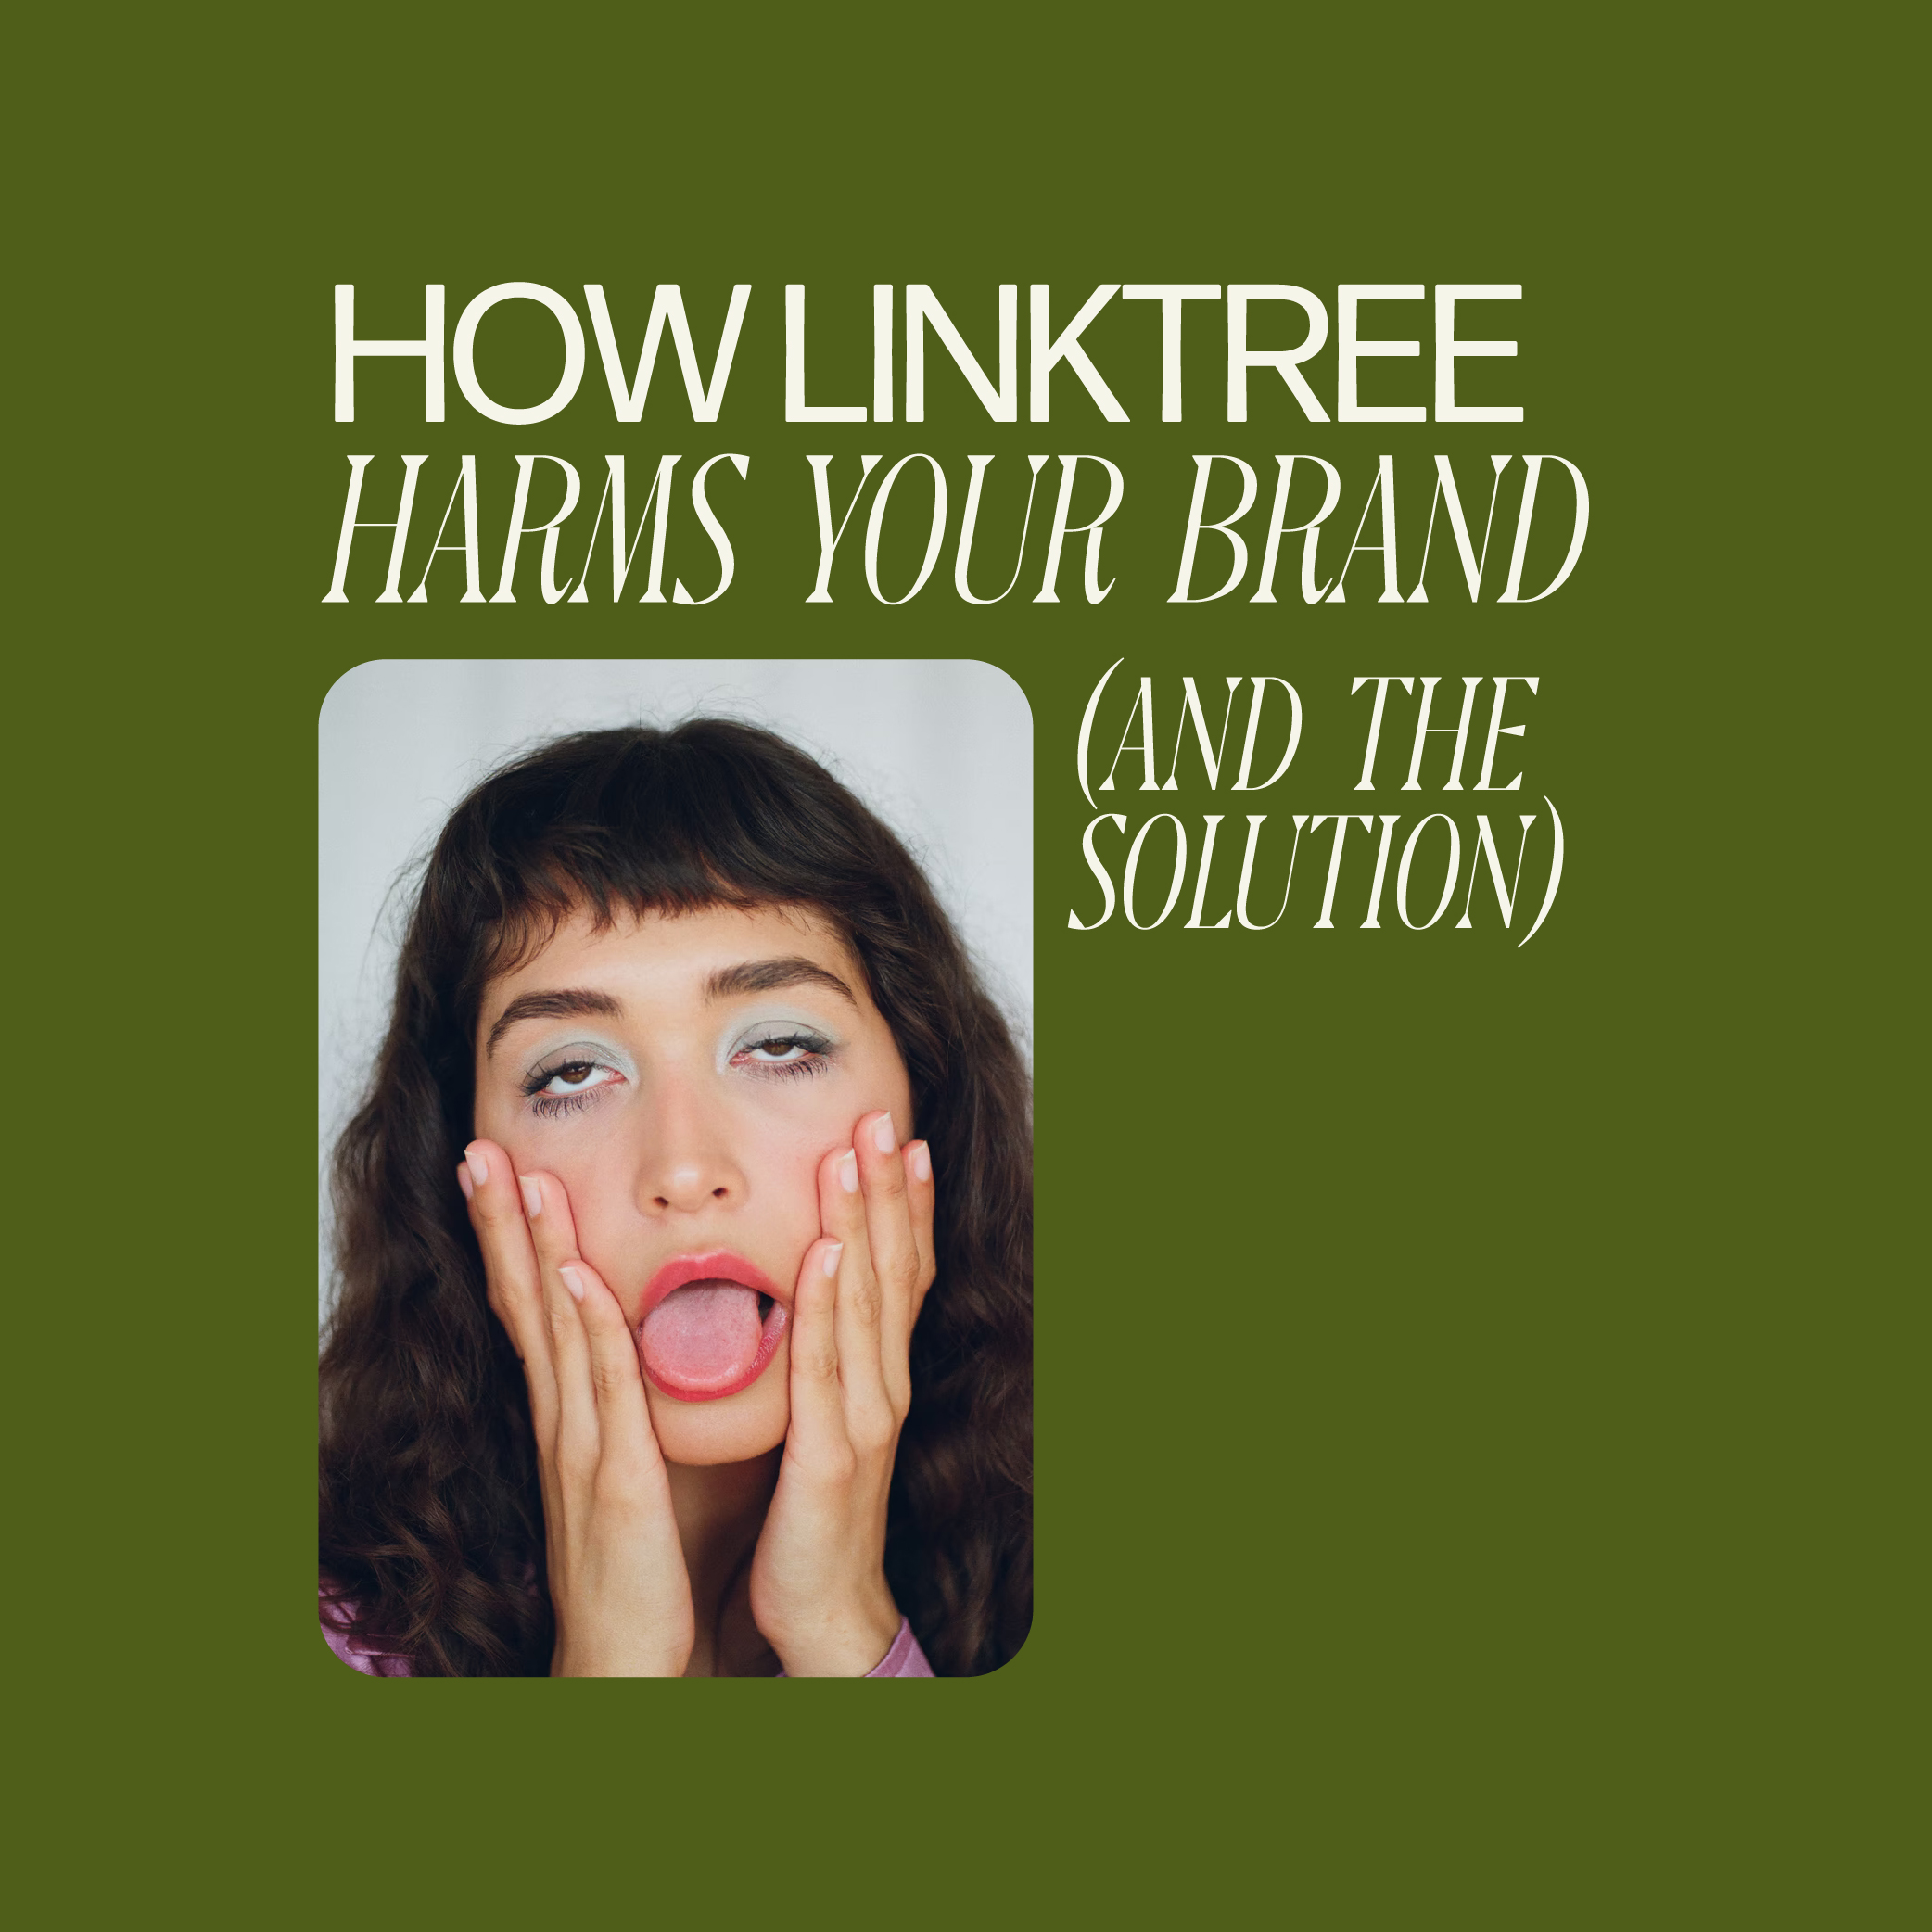 How Linktree Harms Your Brand (and the solution!)